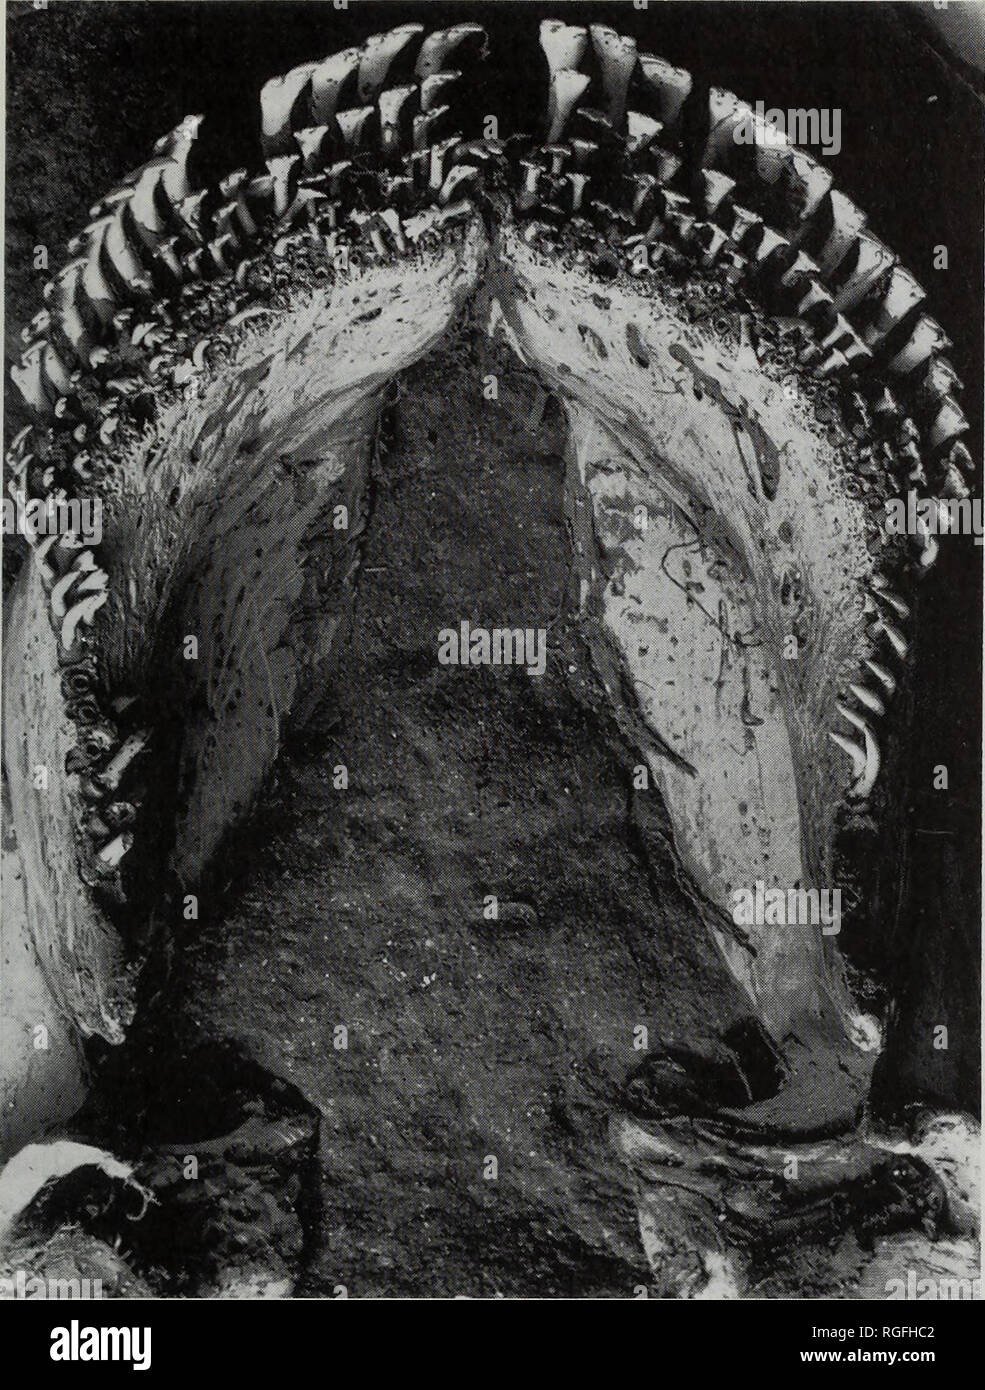 . Bulletin of the British Museum (Natural History) Zoology. REDESCRIPTION OF TILAPIA GUINASANA 31. Fig. 9. Tilapia guinasana. Lower jaw in occlusal view to show the 'horseshoe'-shaped dental arcade, the unicuspid teeth situated posteriorly in the outer tooth row of the dentary, and the anterior, lingually directed, cliff-like expansion of that bone. Specimen from RUSI lot 35865 (dark blue), 76.0 mm S.L. Magnification x 10. expanded area like that in the smaller T. guinasana, but it does not have the same inflated appearance in this species. Judging from the Tilapia material studied, a marked a Stock Photo